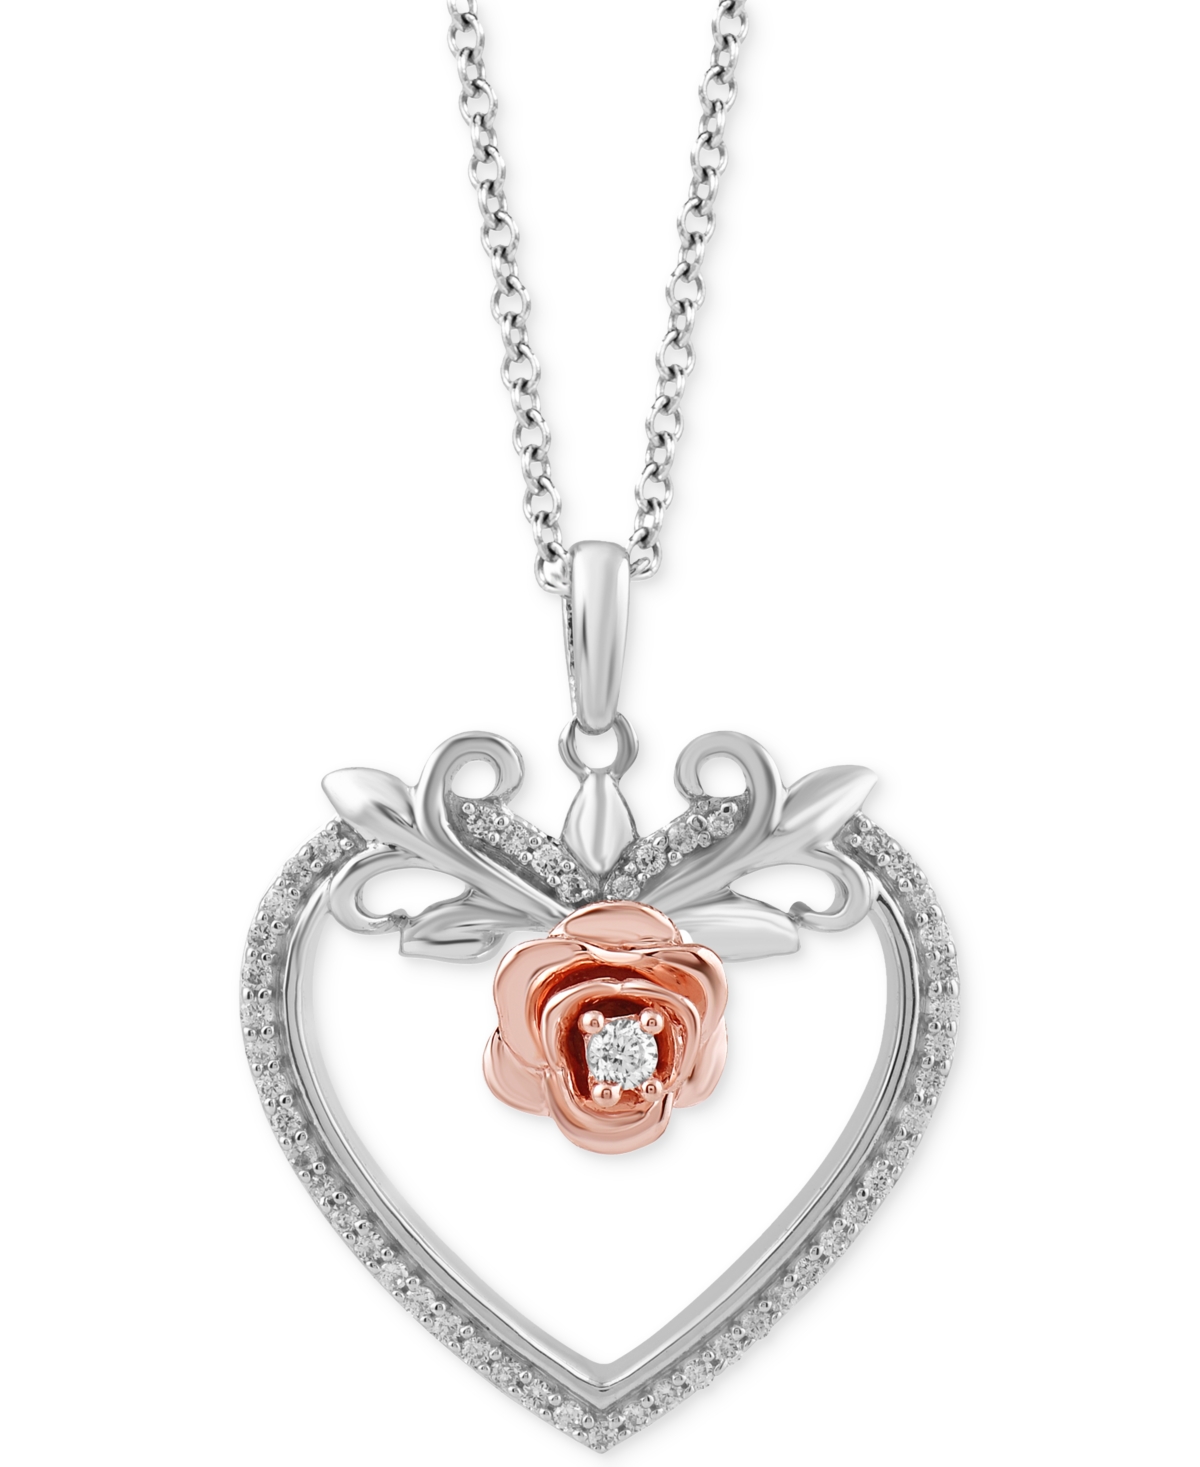 Diamond Belle Rose & Heart Pendant Necklace (1/6 ct. t.w.) in Sterling Silver & 14K Rose Gold-Plate, 16" + 2" extender -